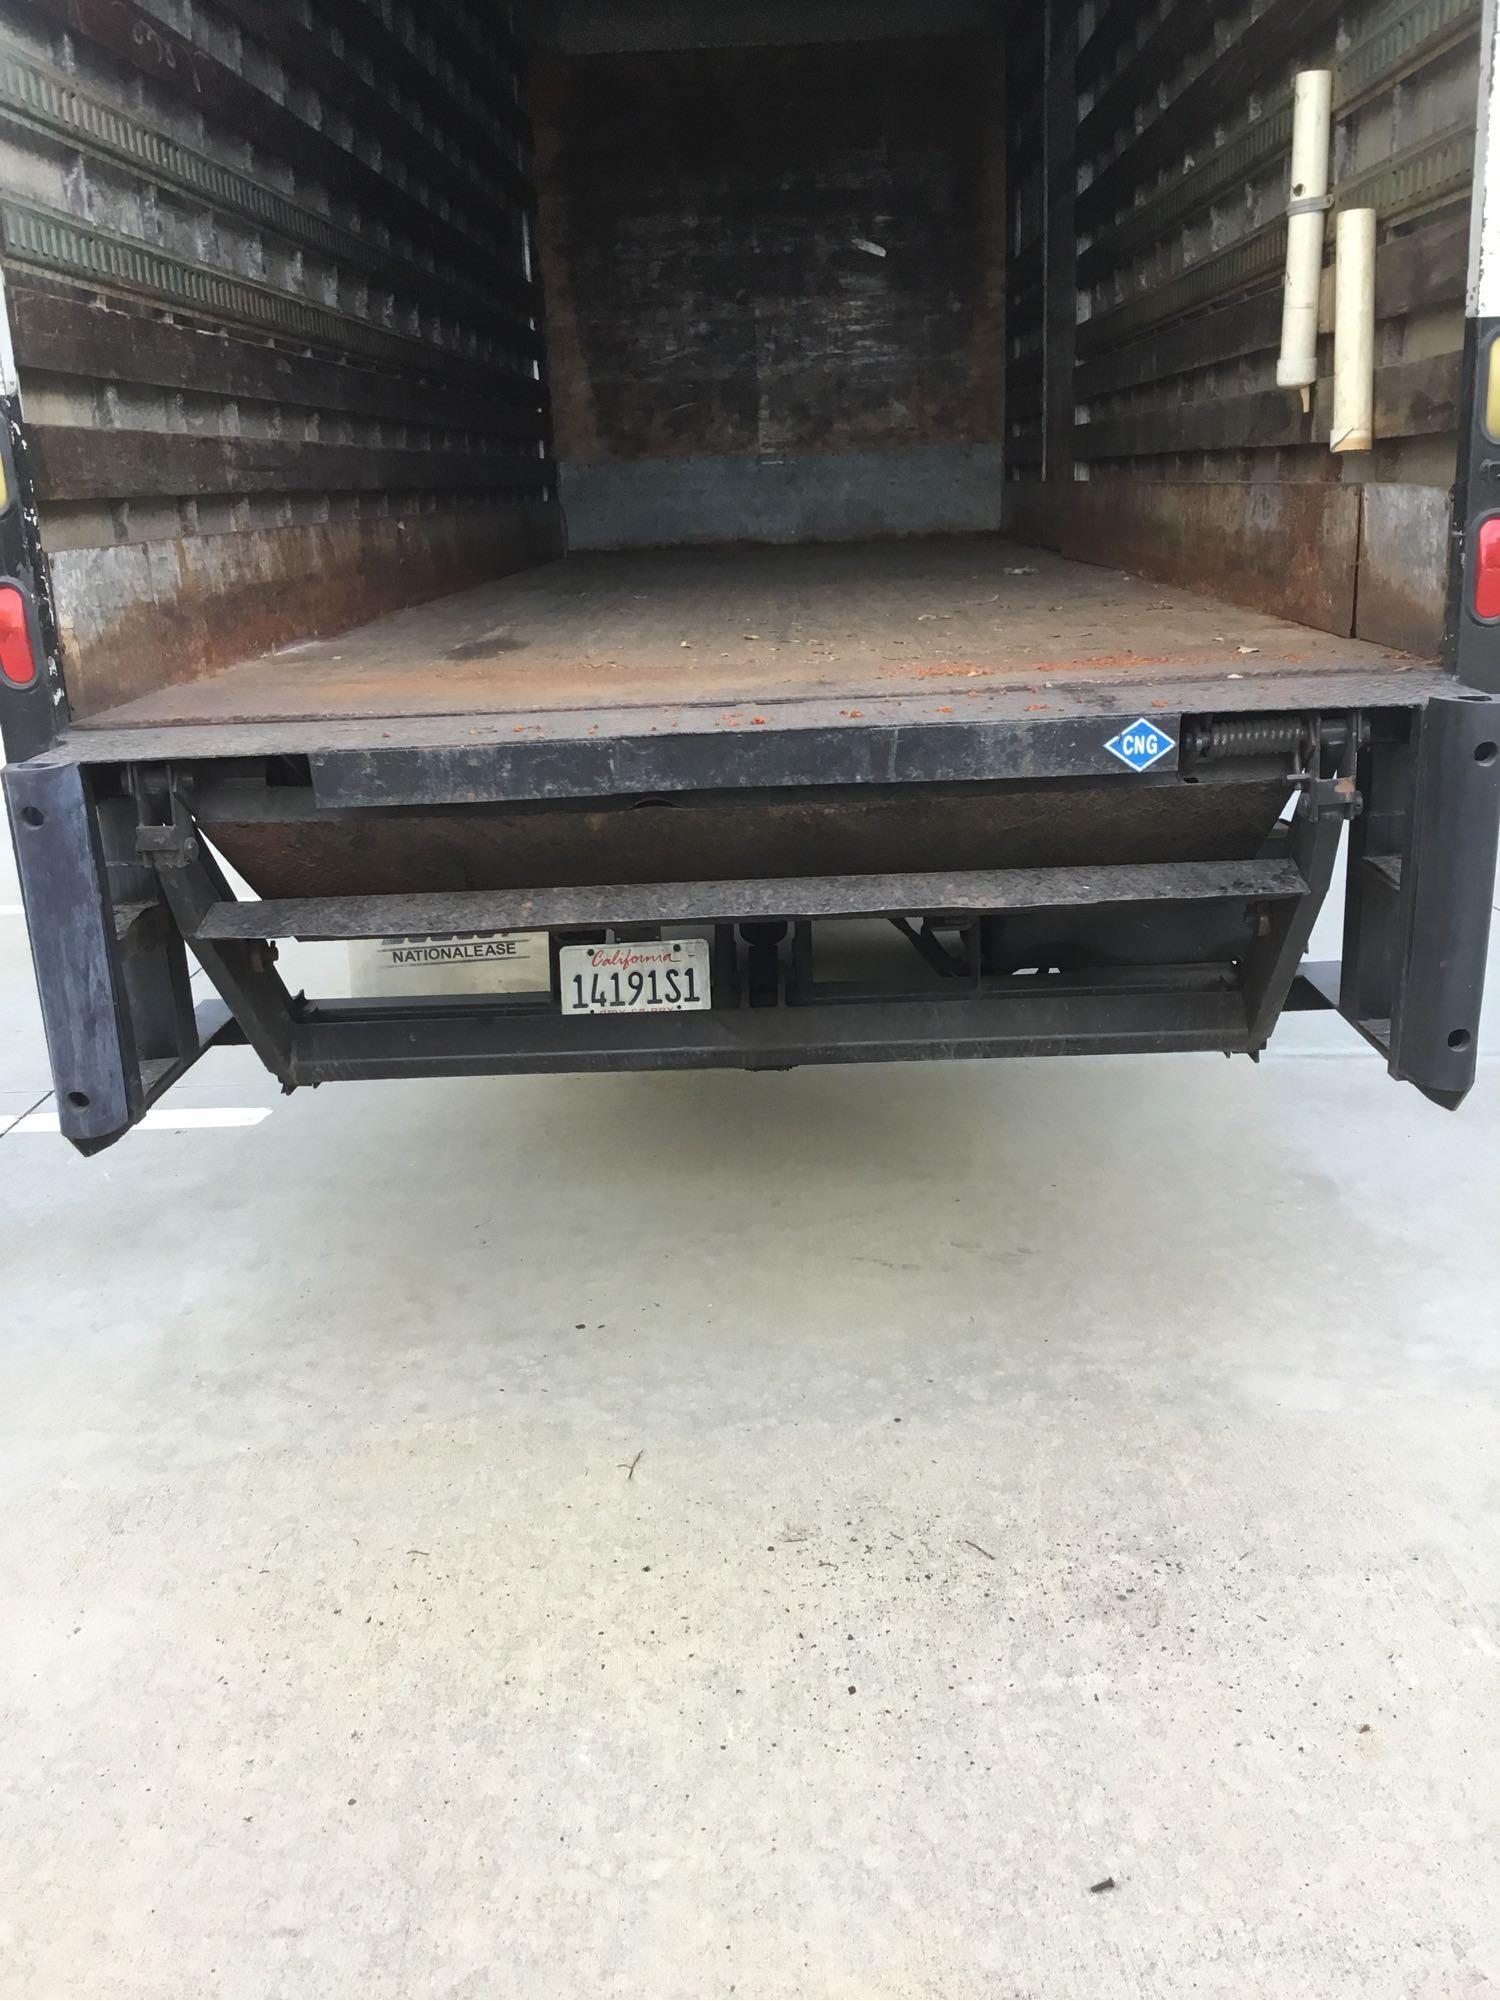 2002 International 4300 CNG 24ft. Box Truck with Lift Gate and Side Access Door